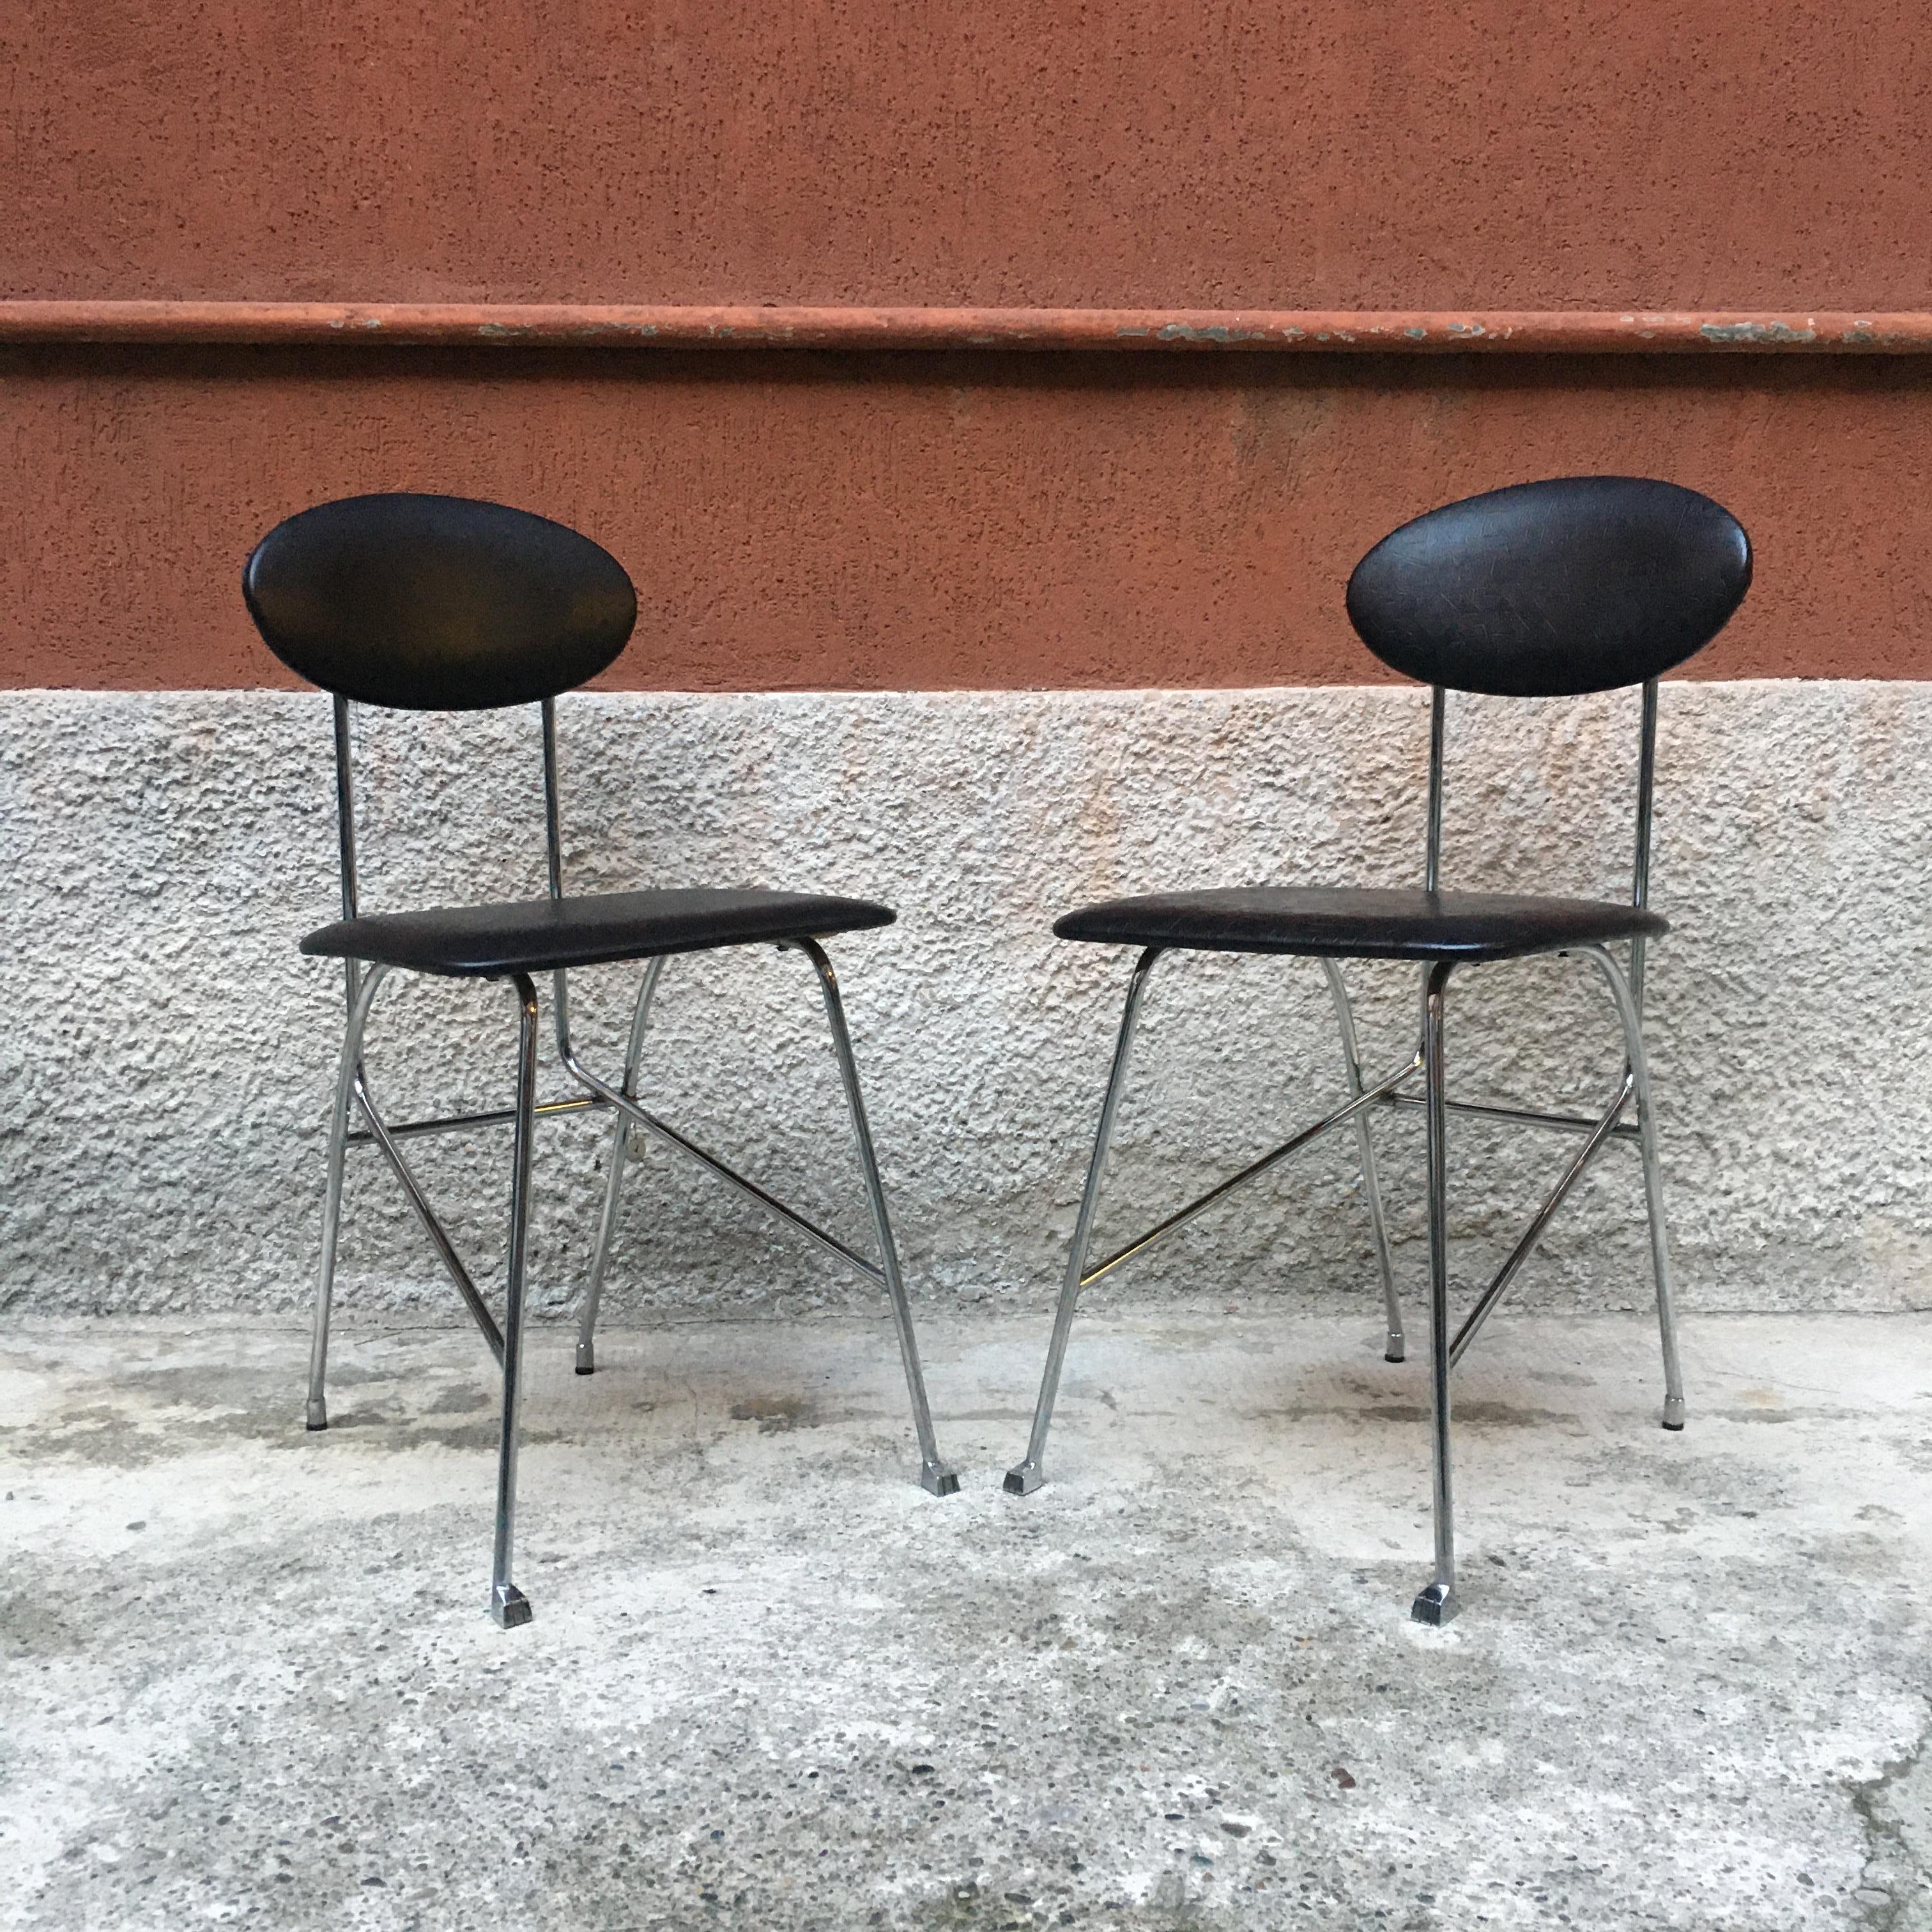 Post-Modern Italian Chromed Metal Chairs with Leather Cover by Mendini for Zabro, 1980s